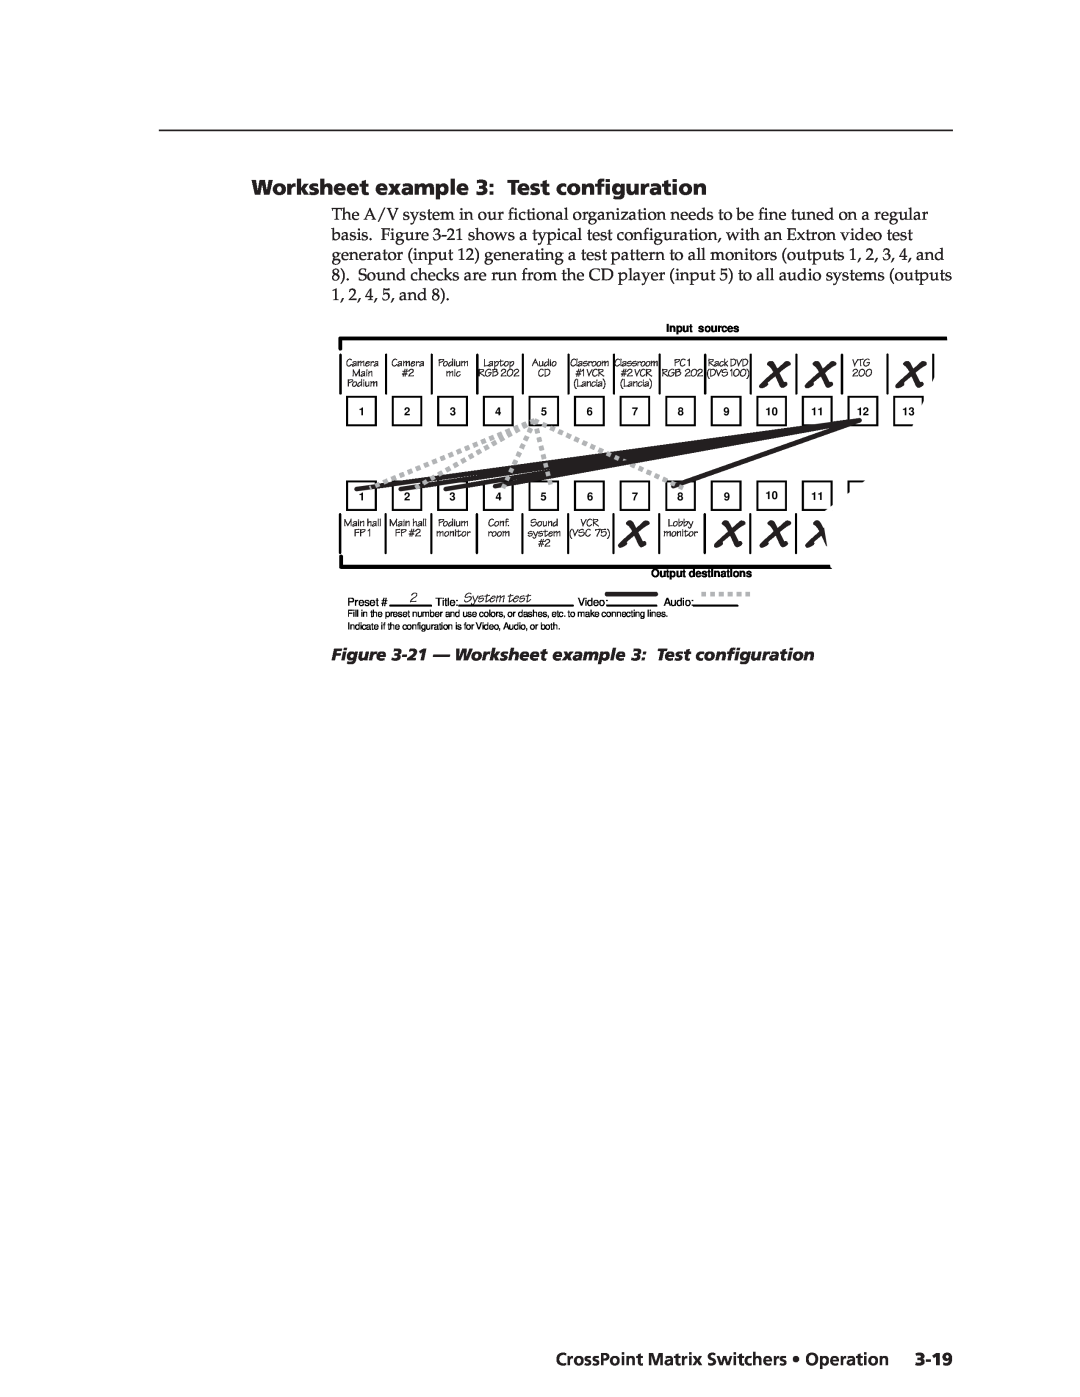 Extron electronic CrossPoint 128 21 - Worksheet example 3 Test configuration, CrossPoint Matrix Switchers Operation 